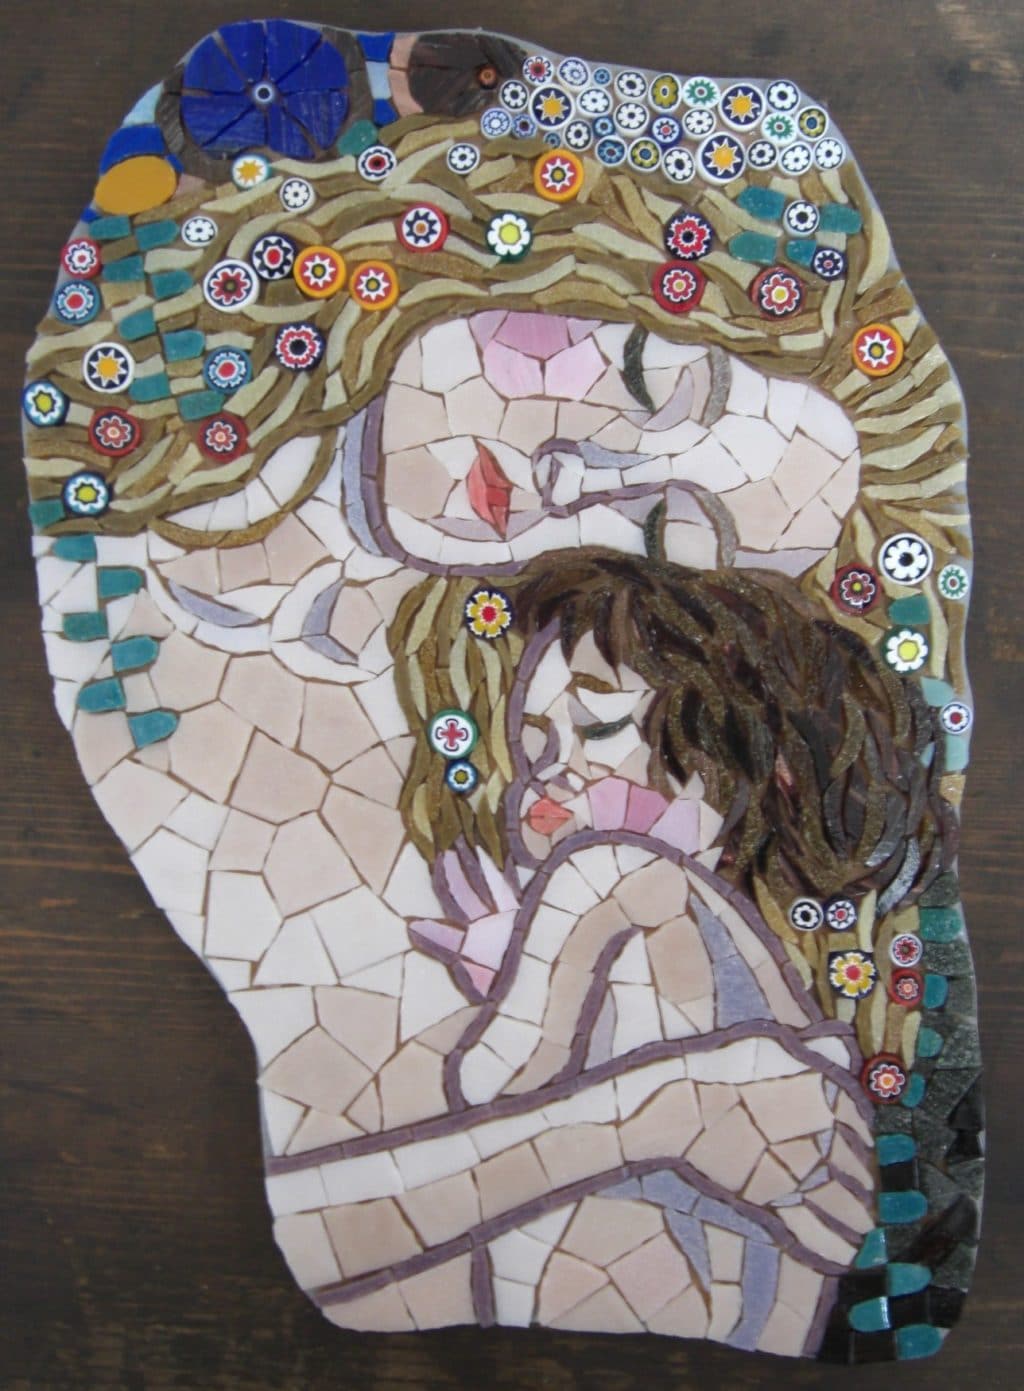 commissions-mosaic-gallery-private-clients (10)